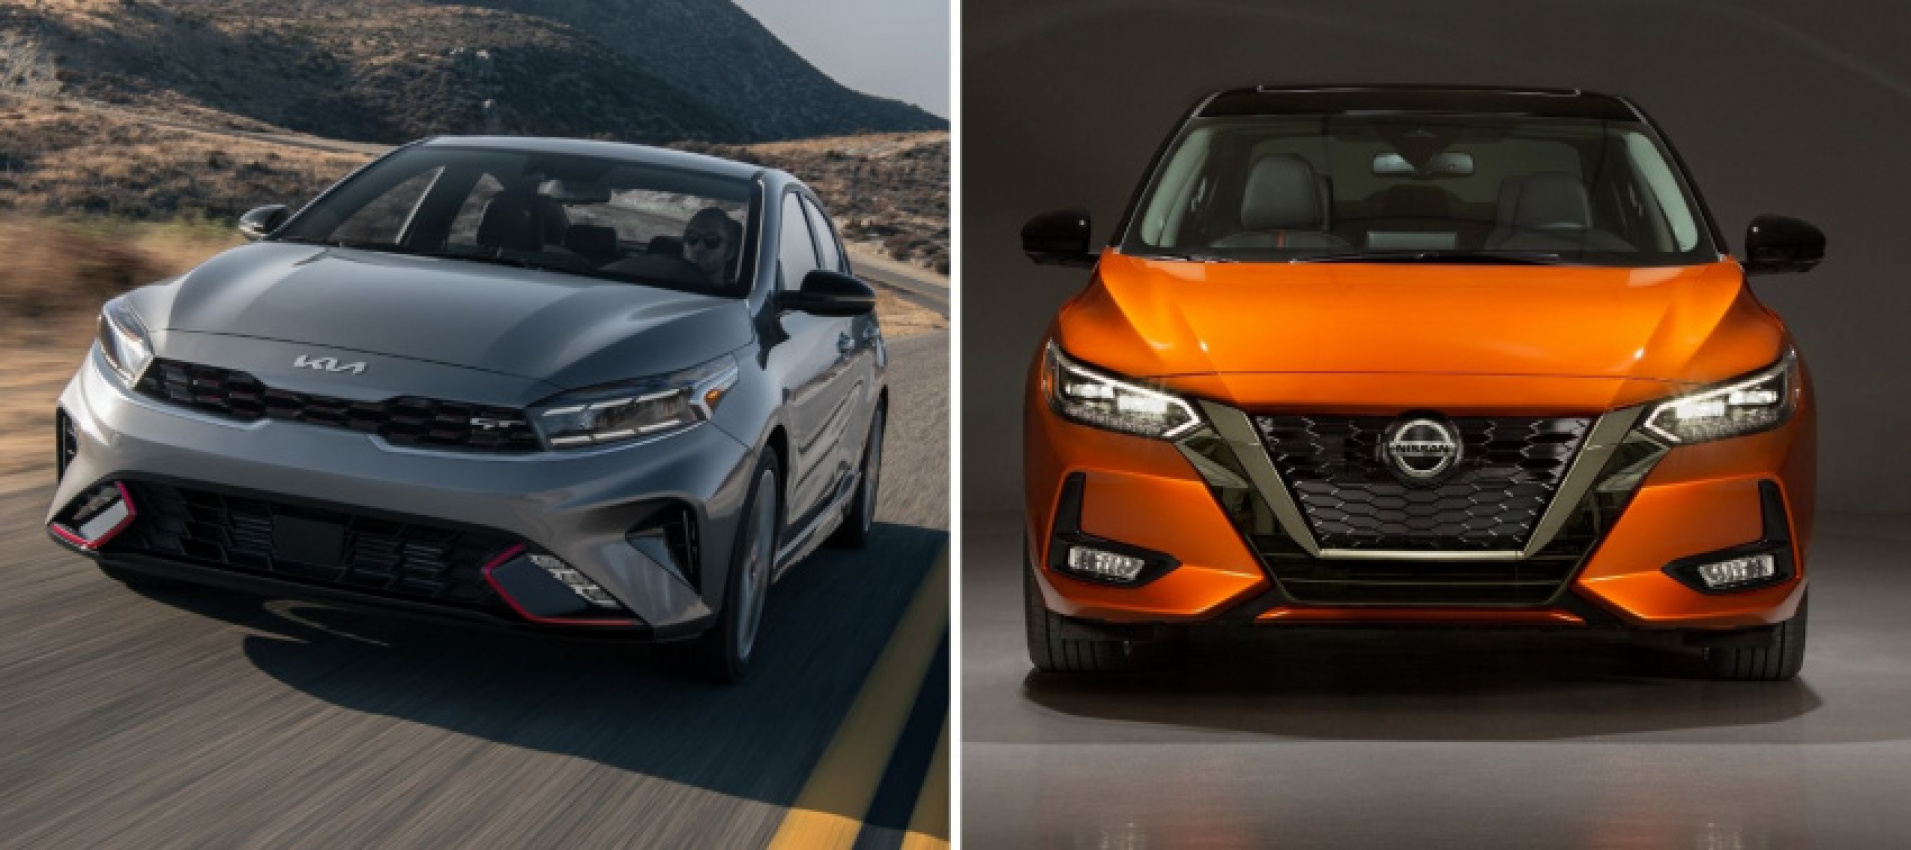 autos, cars, kia, nissan, comparison, forte, kia forte, nissan sentra, sentra, 2022 kia forte vs. 2022 nissan sentra: which new compact car is best for you?